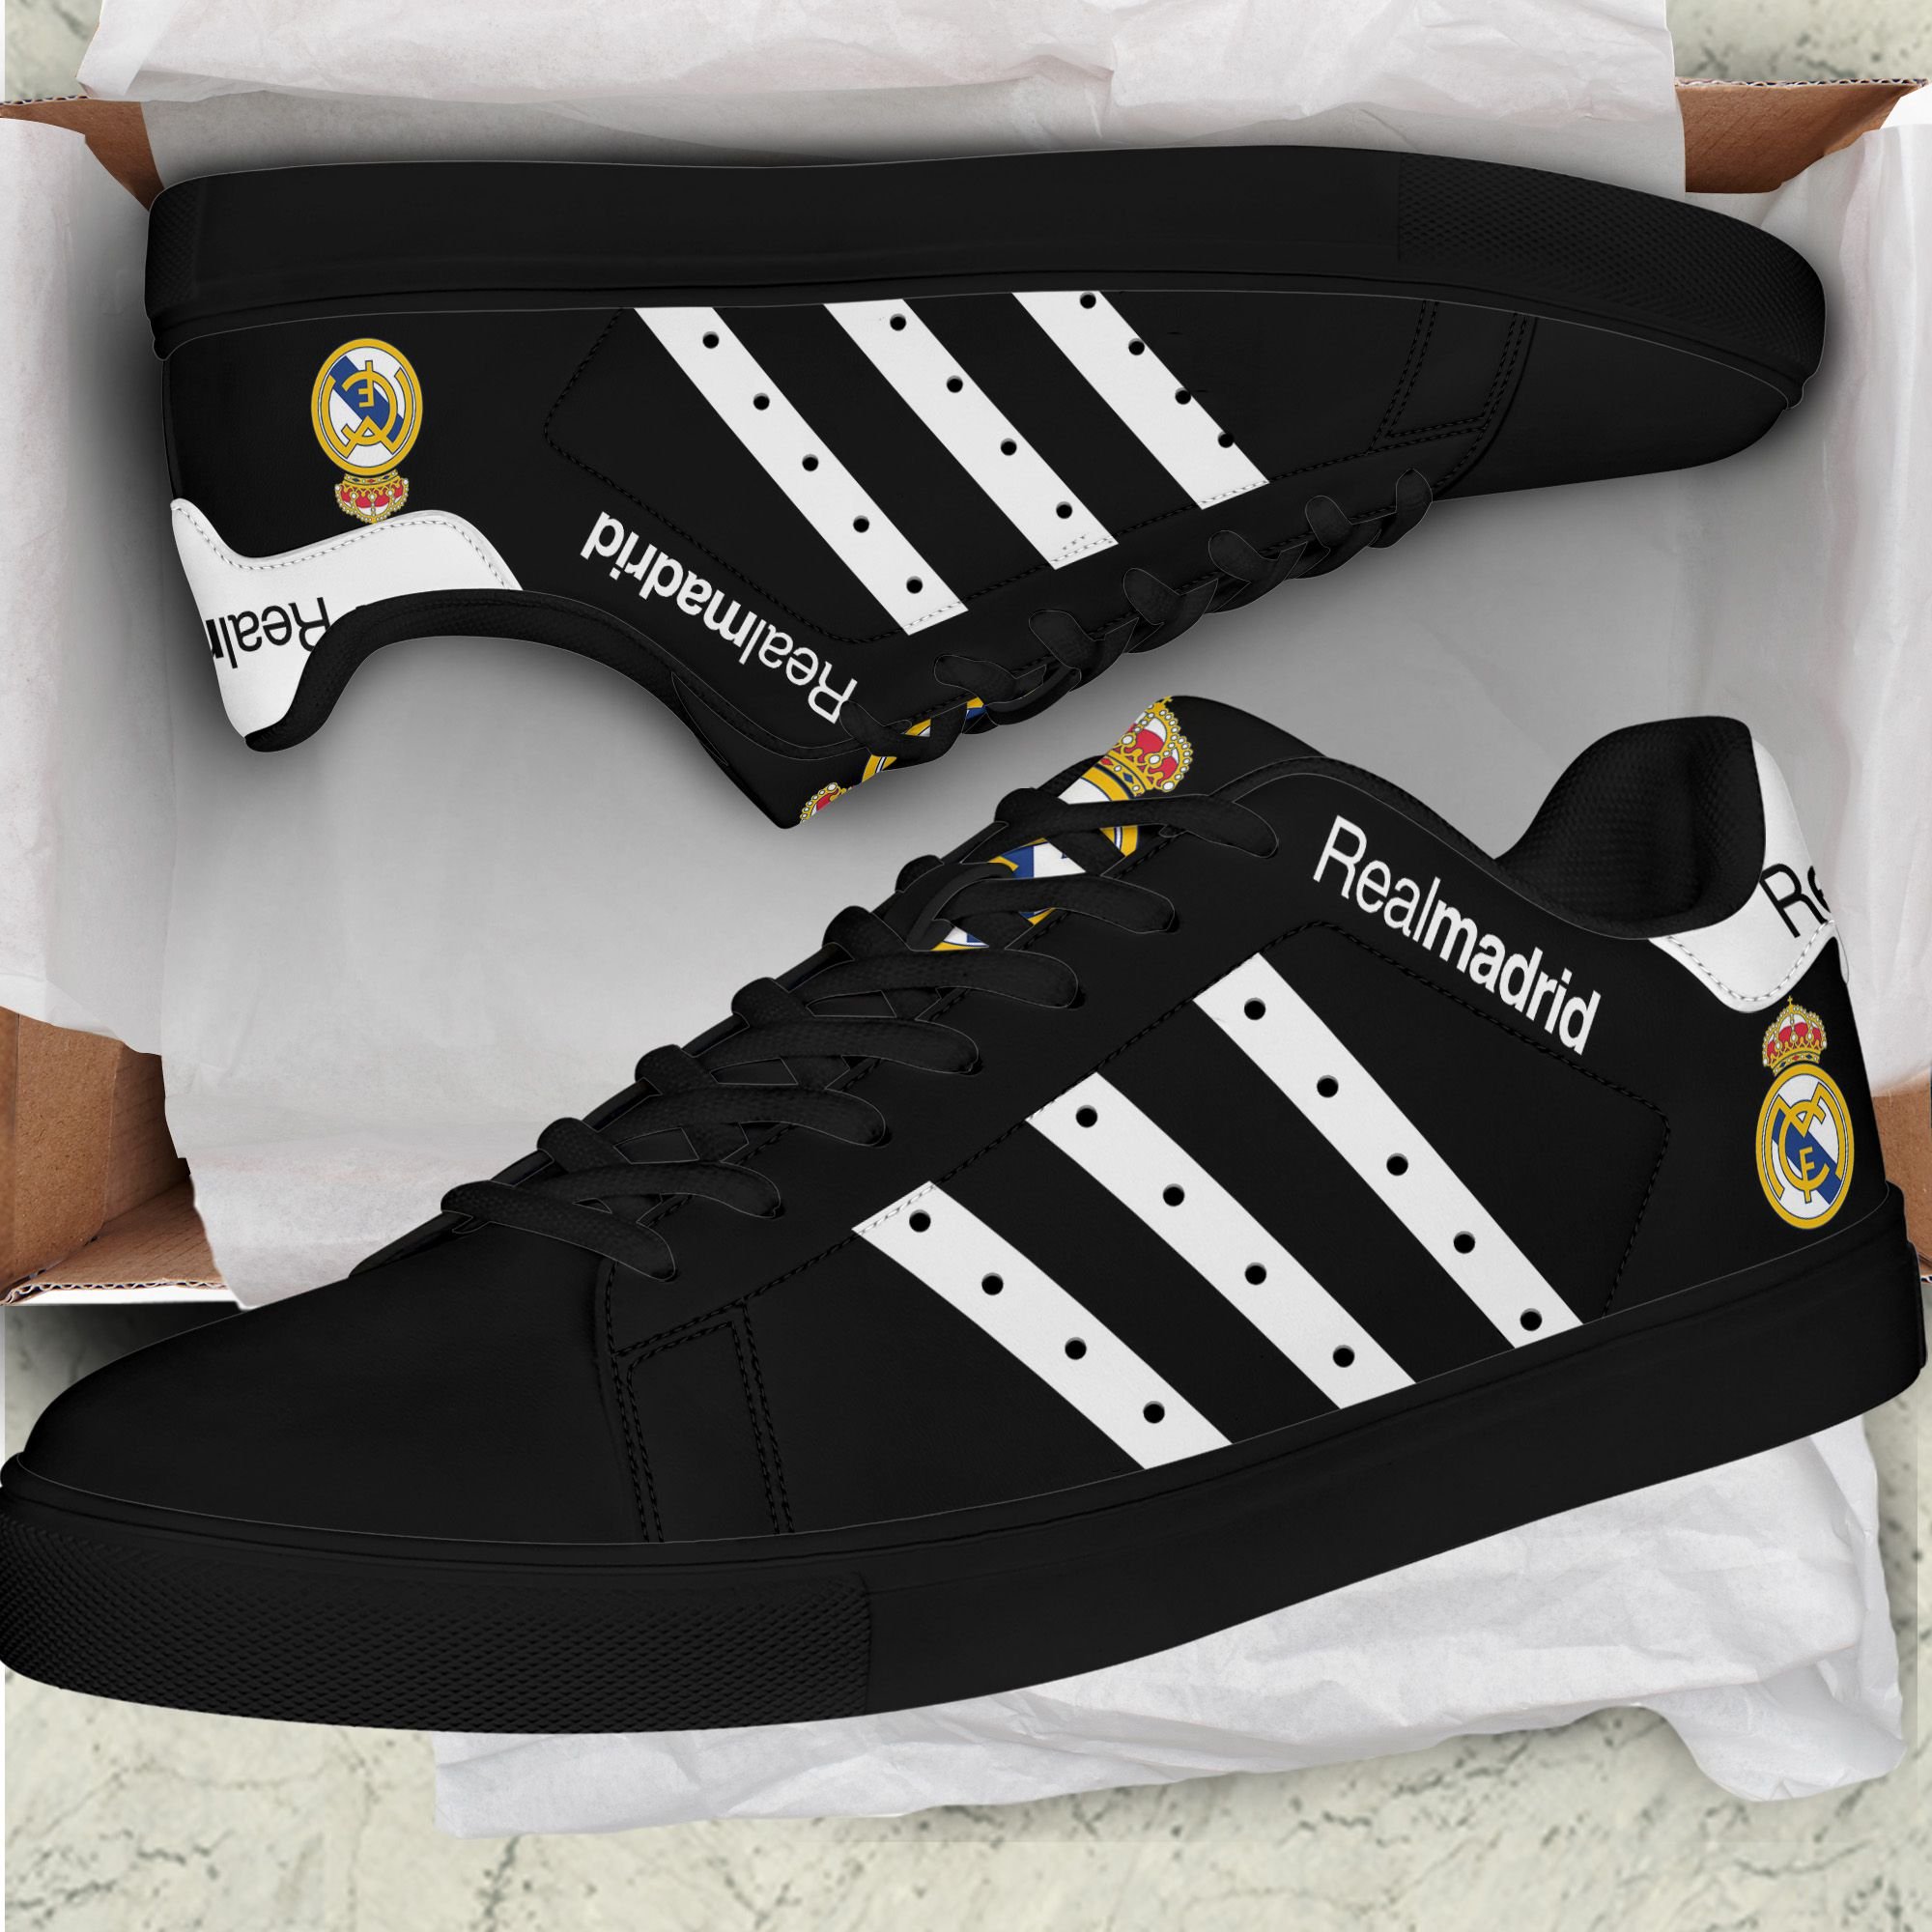 Real Madrid stan smith shoes